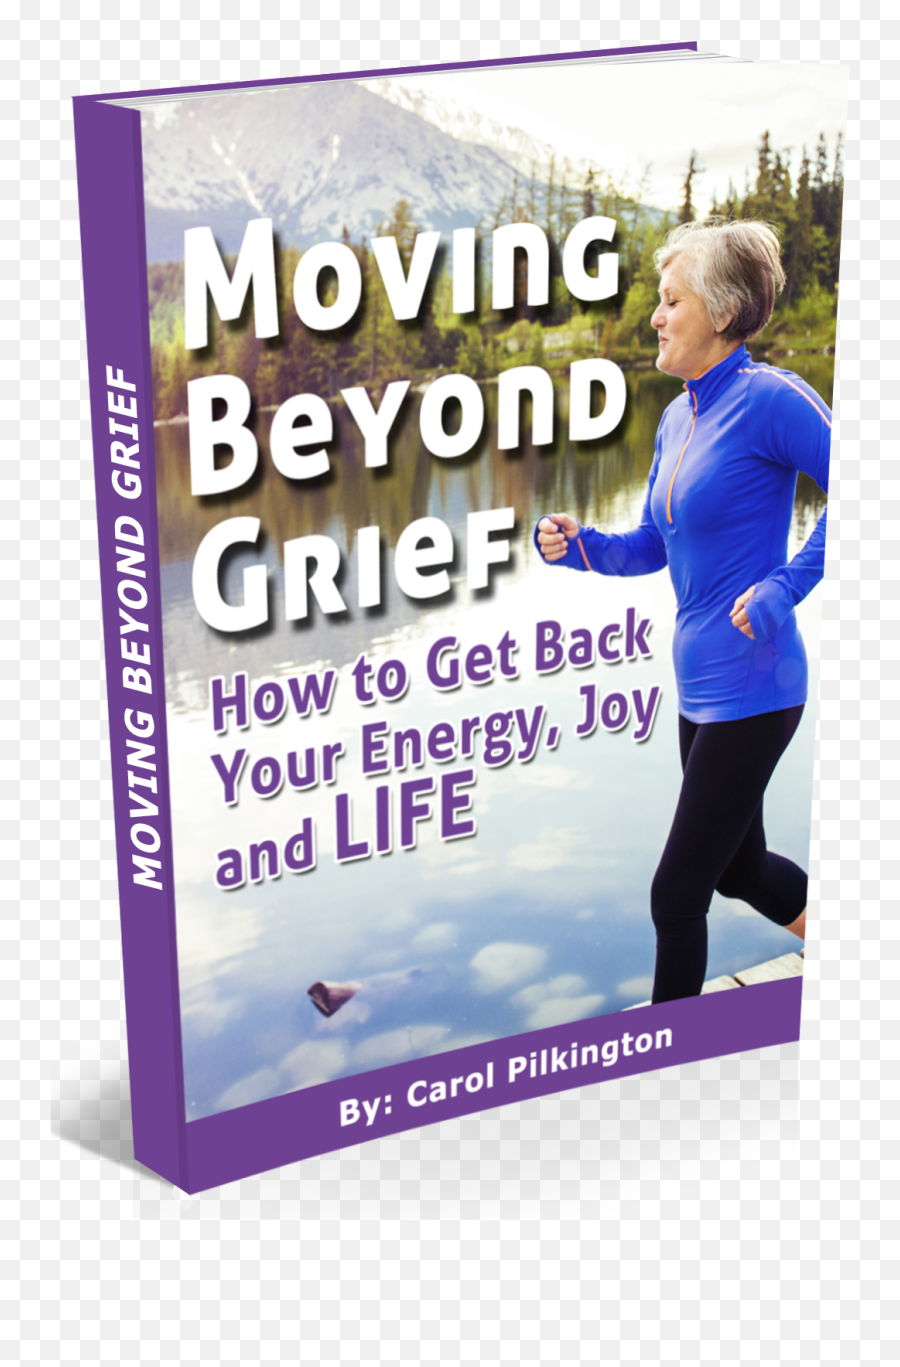 Grief And Loss Counseling With Carol Pilkington Emoji,Emotion Mask Joy